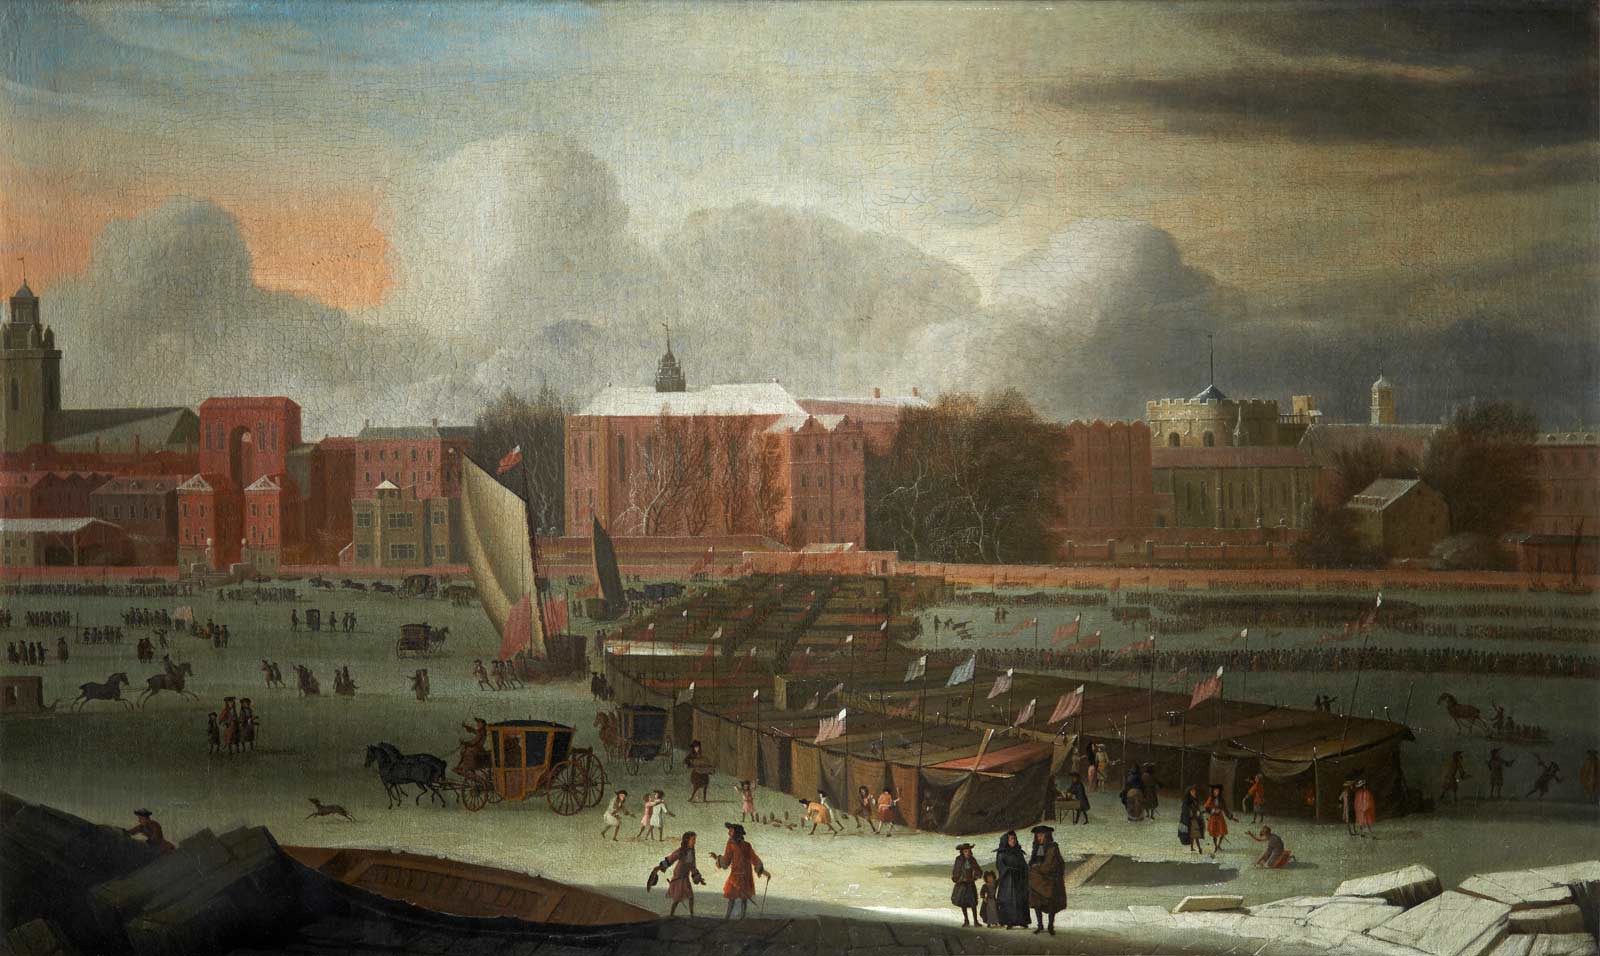 A Frost Fair on the Thames at Temple Stairs. January 1684. The frost fair scene shows a line of booths on frozen Thames in centre, coaches, sledges, sedan-chairs & citizens are shown on ice. Also a game of ninepins in progress.In the foreground centre and nearby is gaping hole in ice. You can see in the painting from left to right; St. Clement Danes, Arundel St., Essex Bldgs., Essex Stairs, Middle Temple Hall, Temple Stairs, Crown Office Row, Temple church, Serjeant's Inn Hall, precursor of Paper Buildings and on the extreme right King's Bench Walk.
